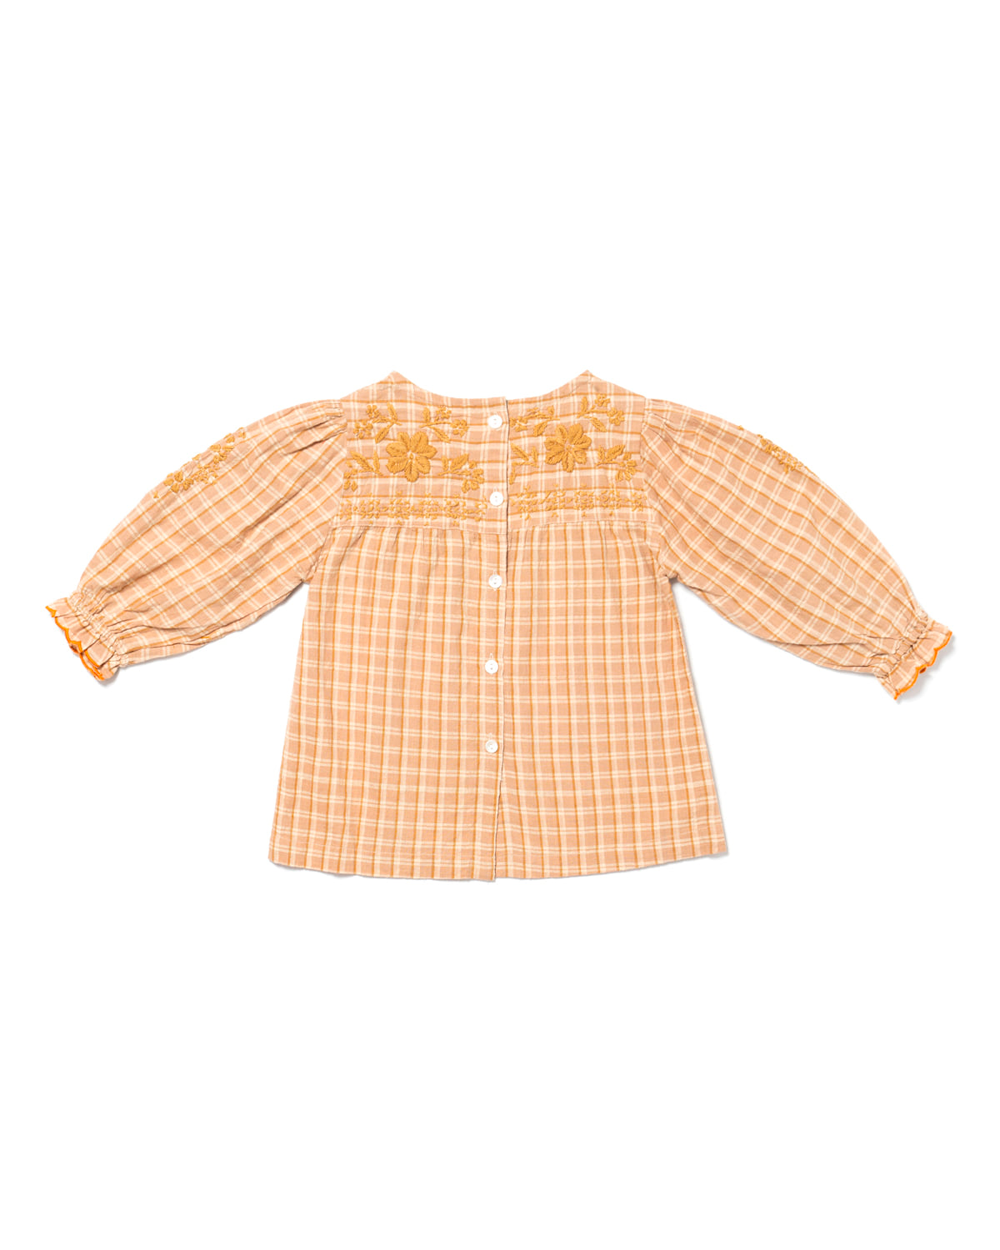 [LALI KIDS]EMBROIDERED SUNFLOWER TOP/ CREAM PLAID [6Y, 8Y]